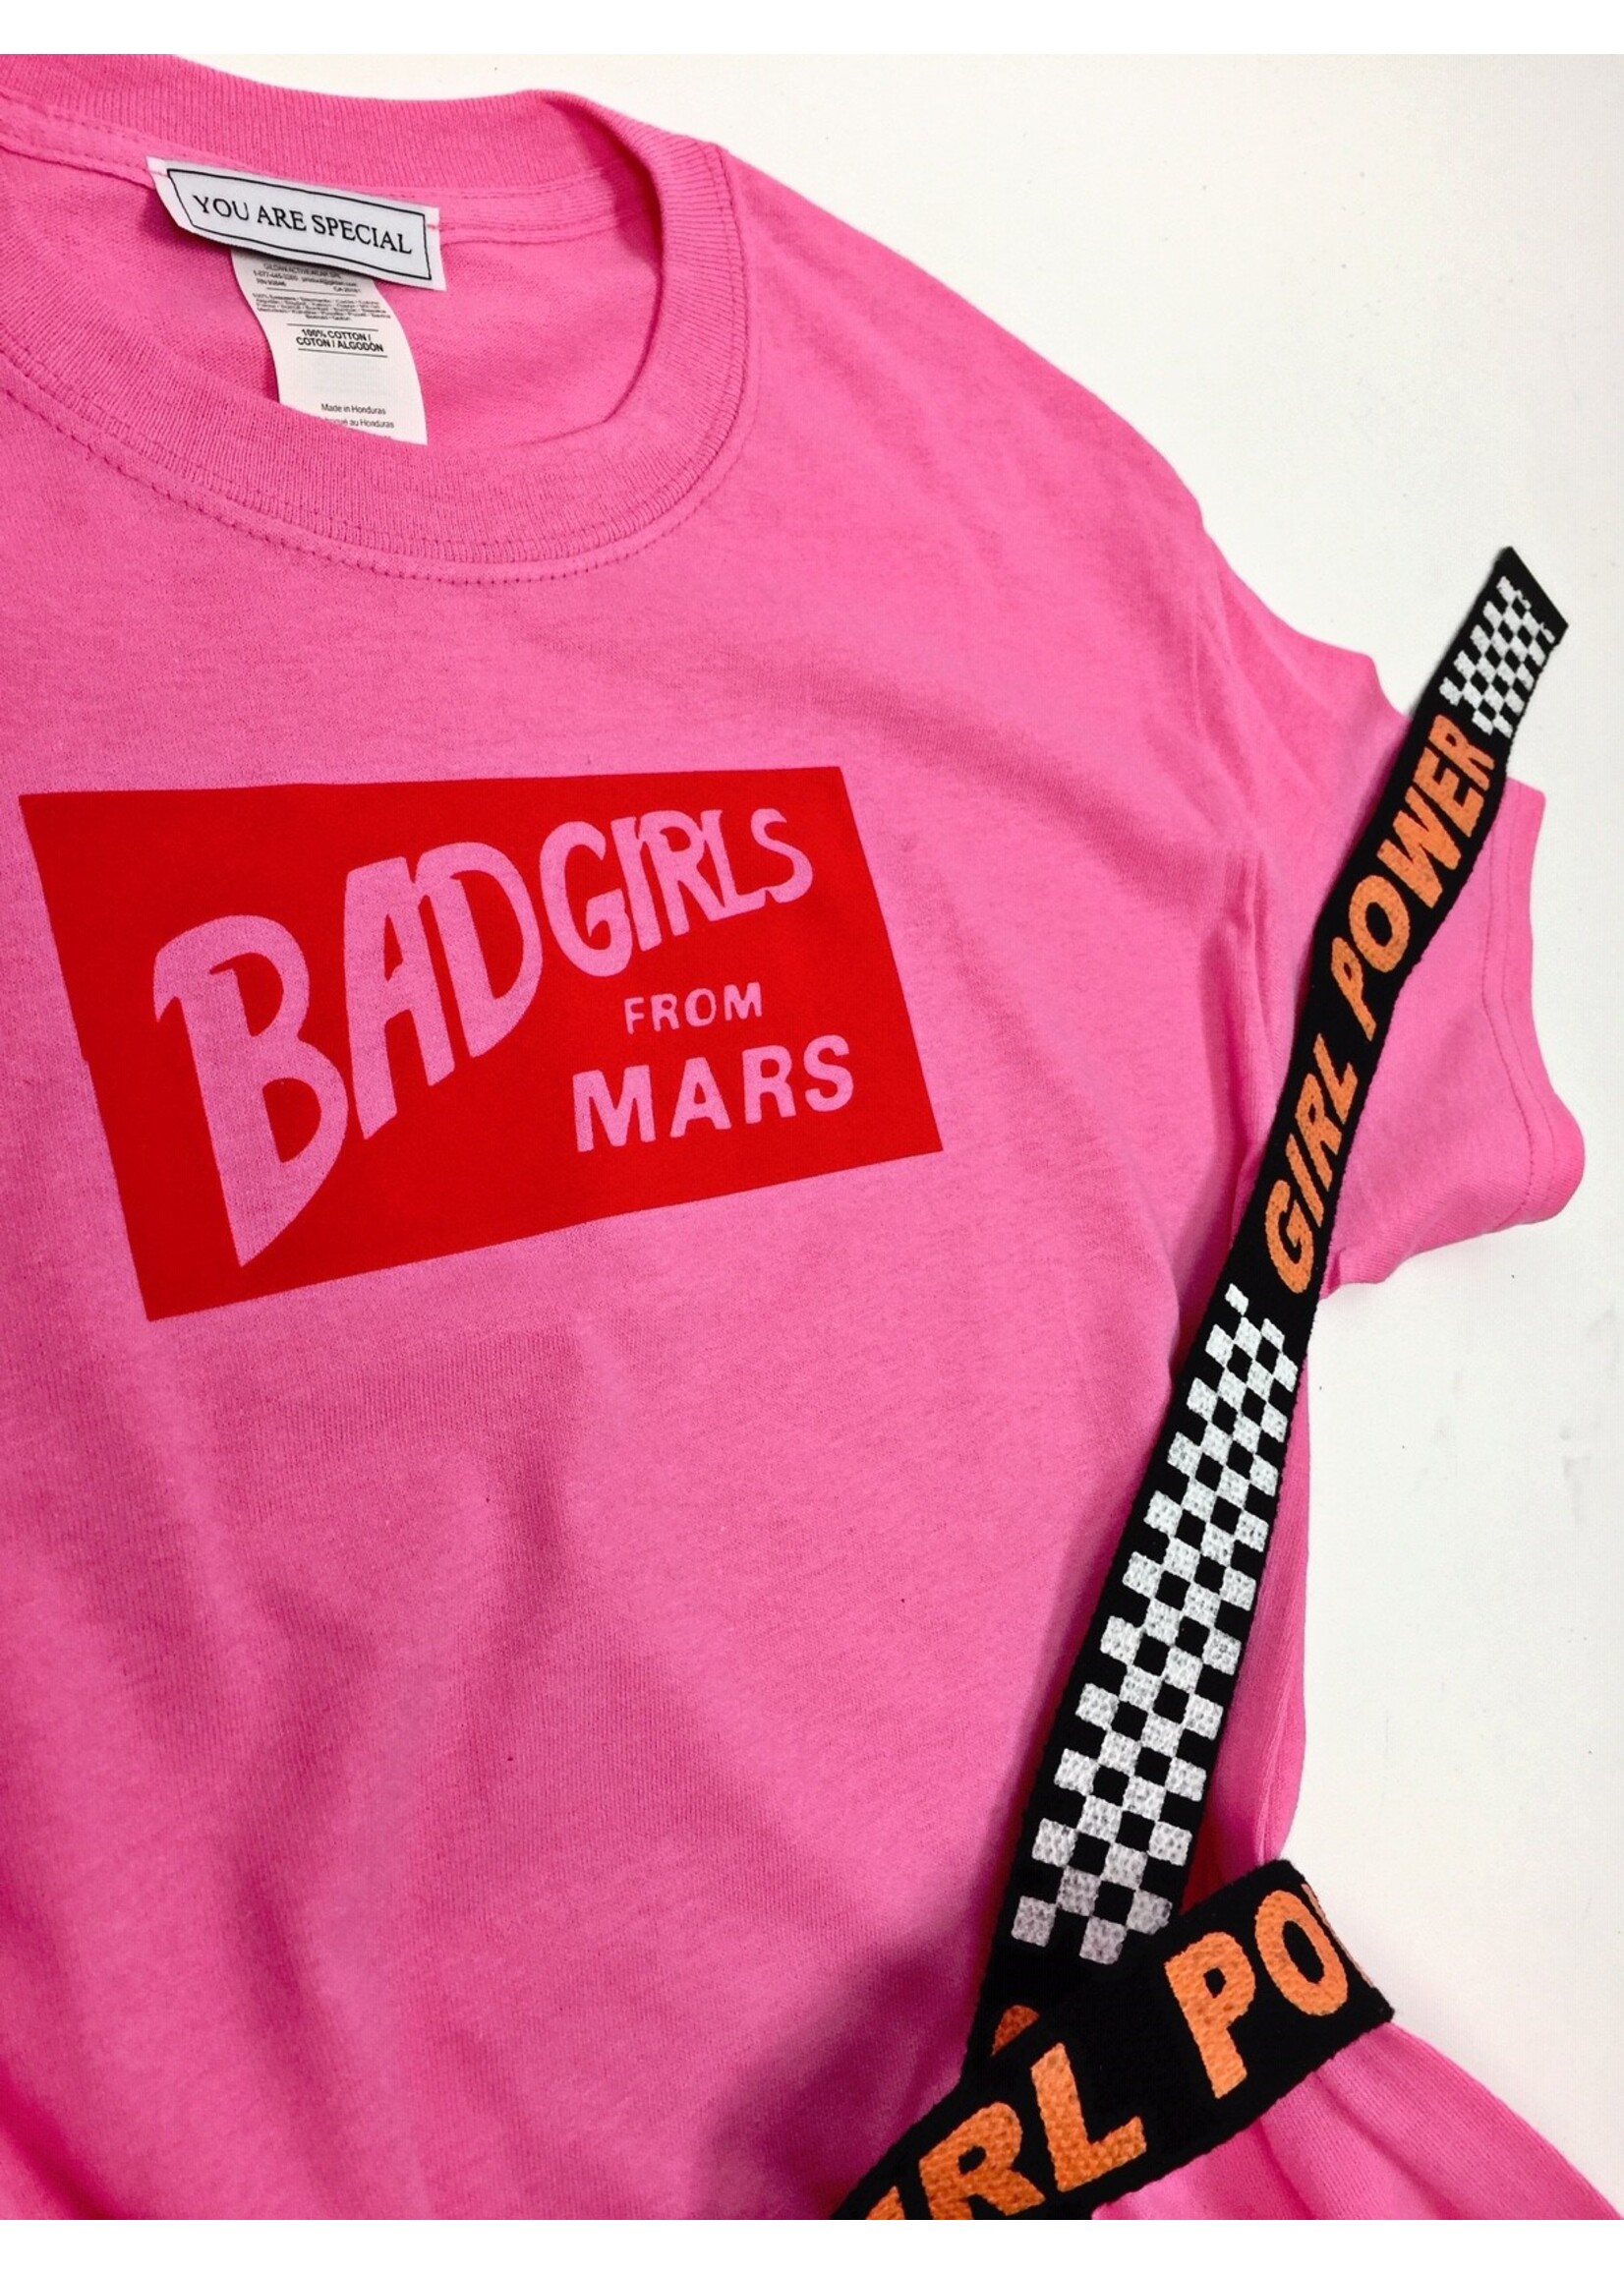 YOU ARE SPECIAL ''Badgirls From Mars" Pink T-Shirt